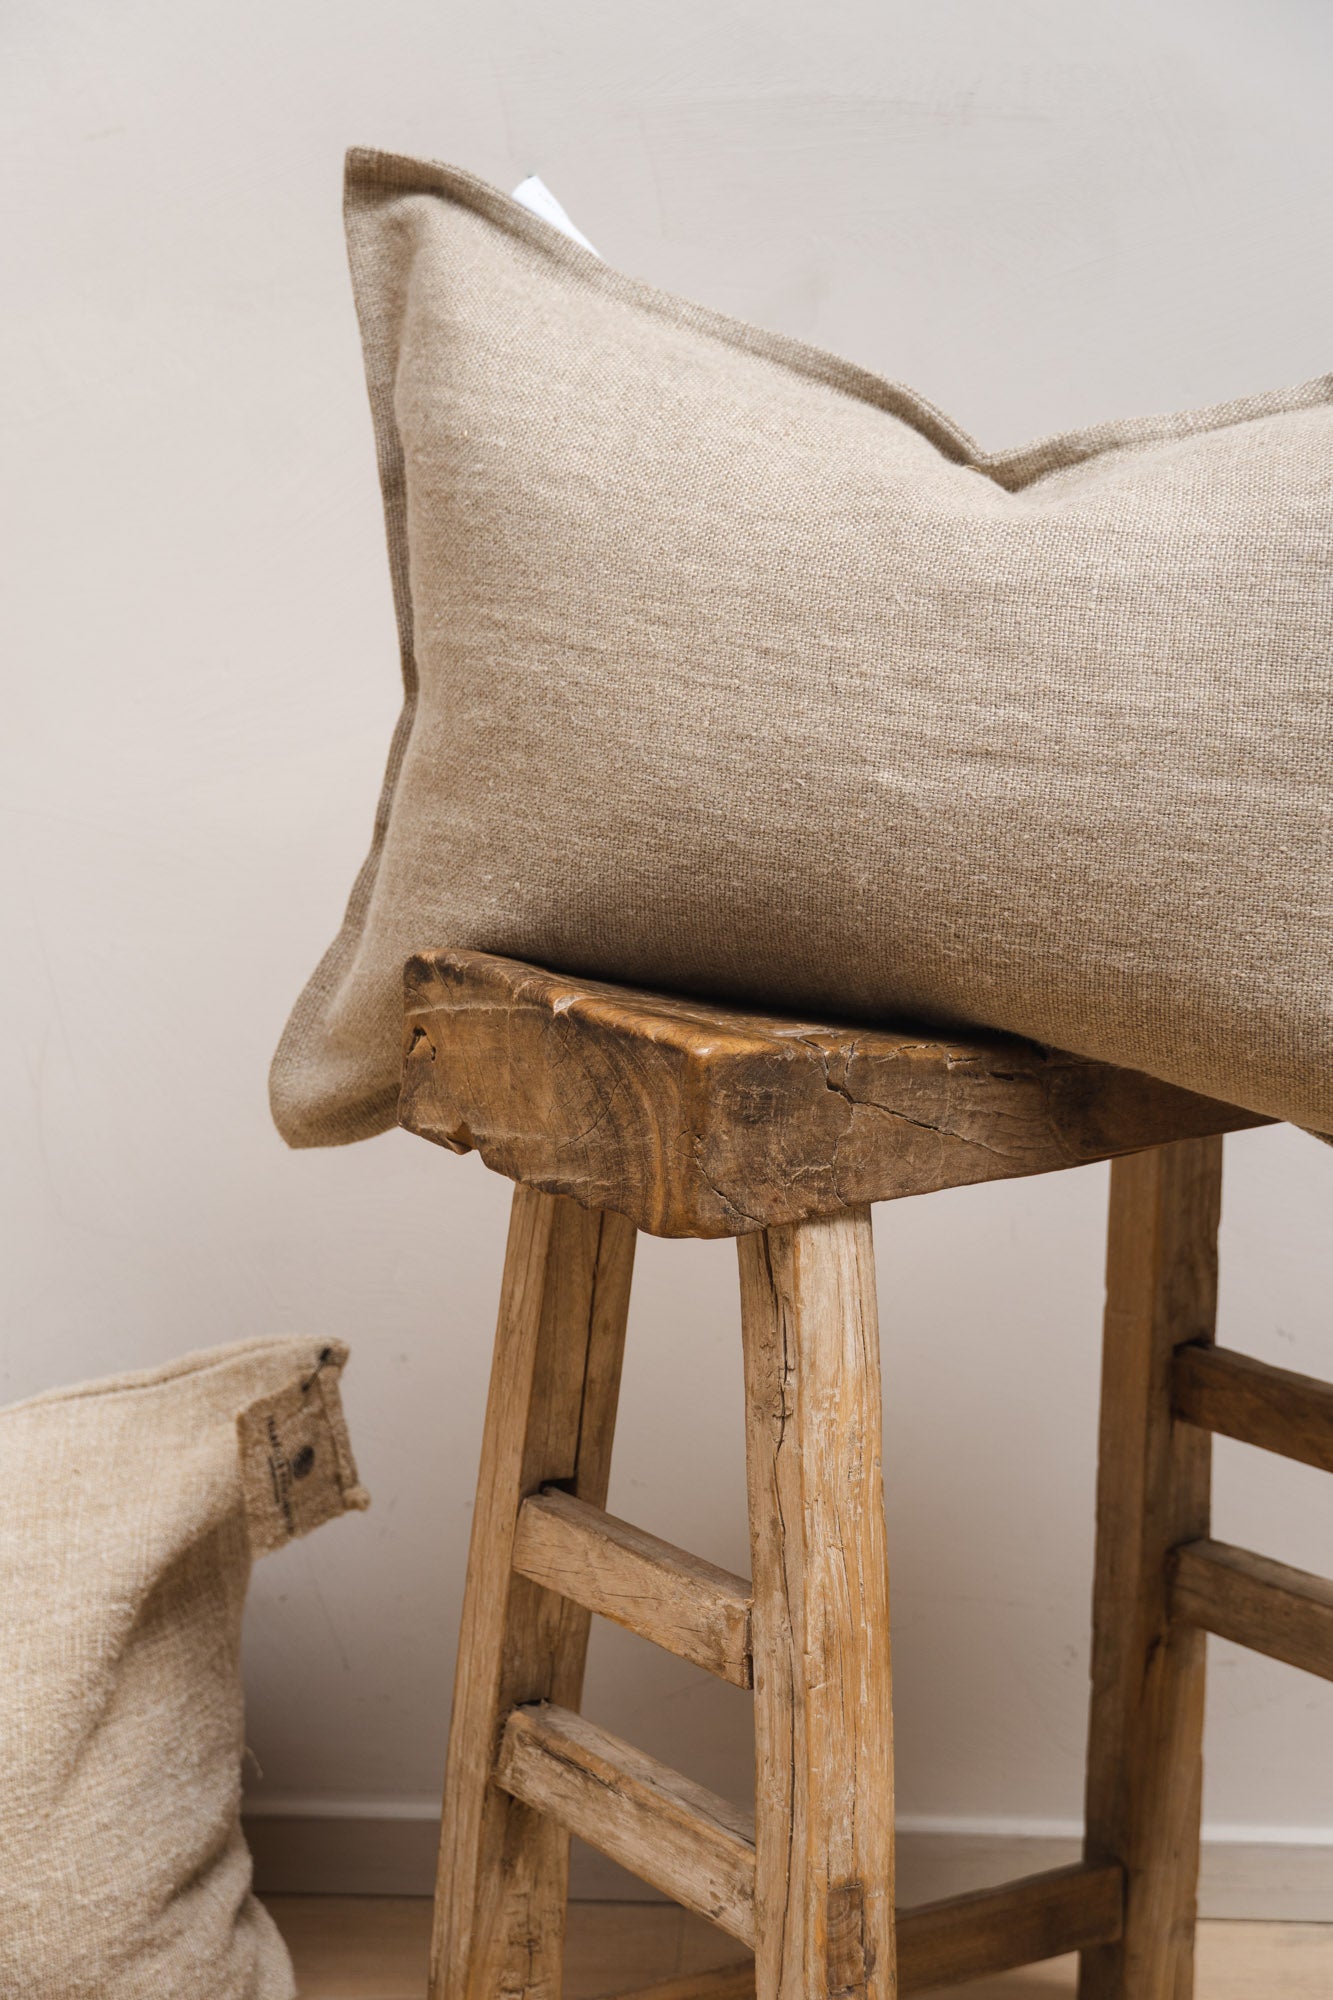 Details of the Linen Cushion Heavyweight Natural set on a wooden stool.